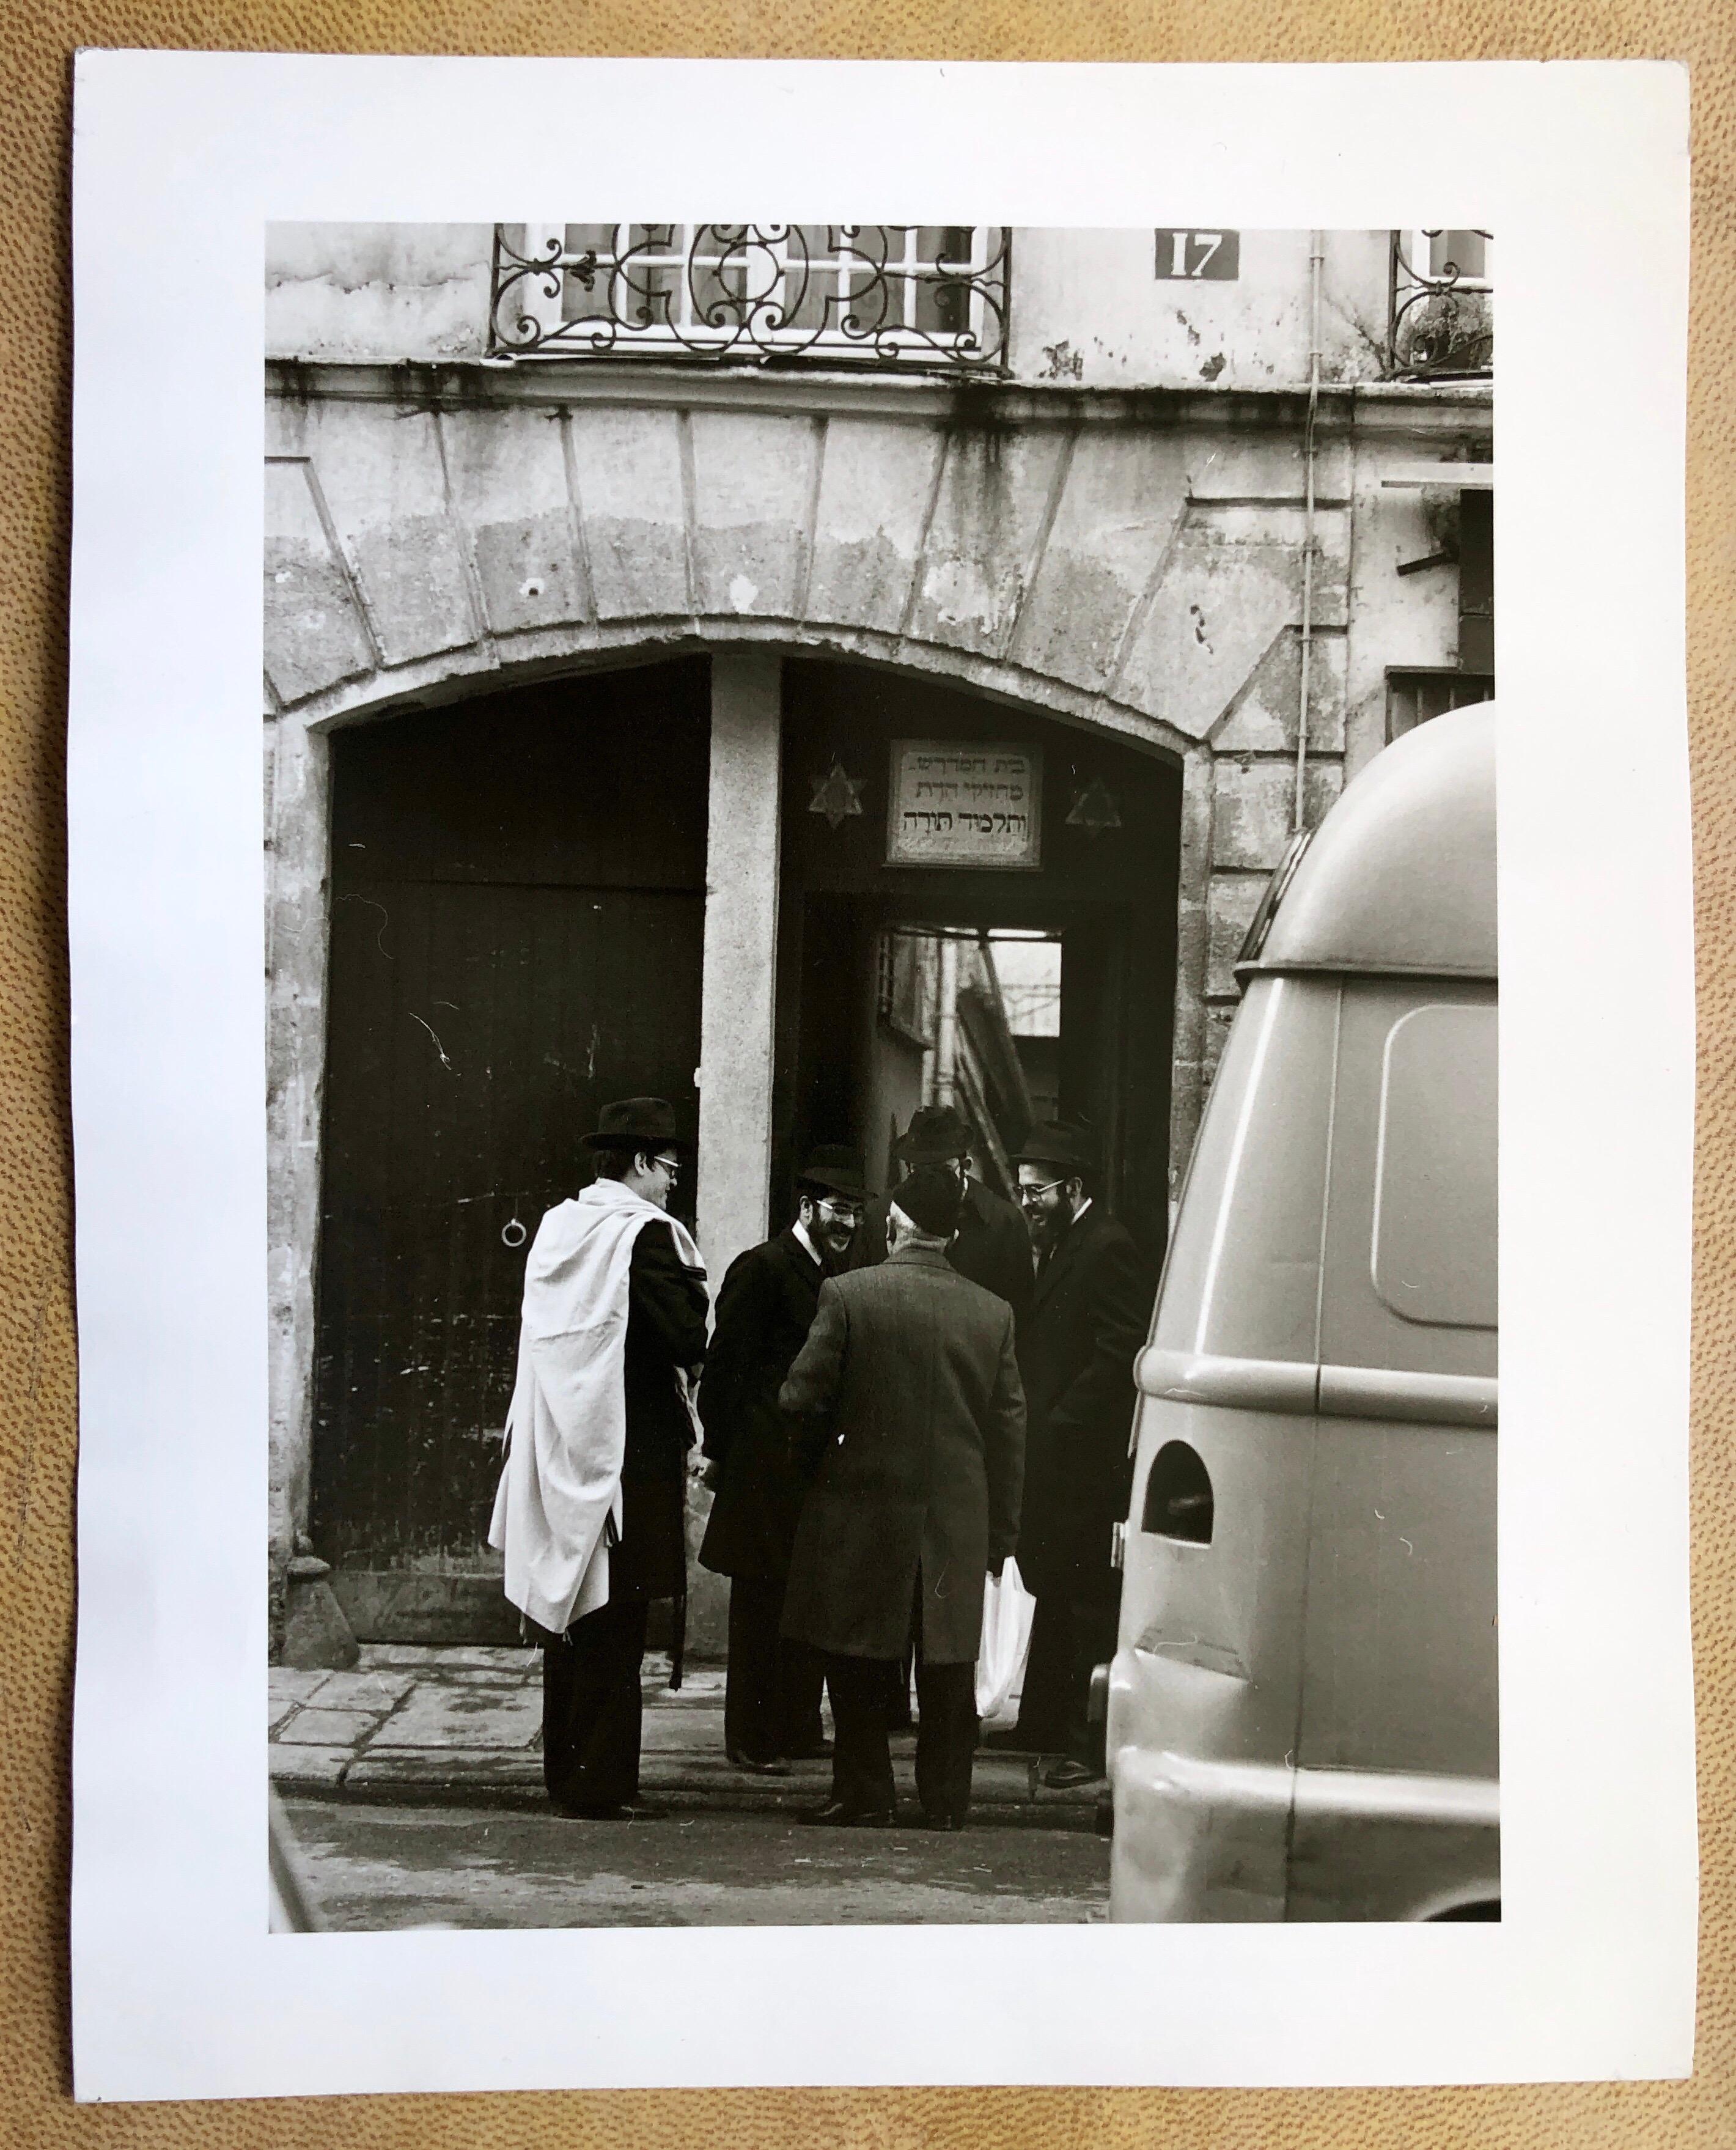  17 Rue des Rosiers Paris, France.
A small Shul in the old Jewish quarter of Paris (the Pletzel), known as the ‘Zibetzin’, located at 17 Rue De Rosiers, The Lubavitcher Rebbe was known to have frequented the ‘Zibetzin’ Shul for learning and Davening